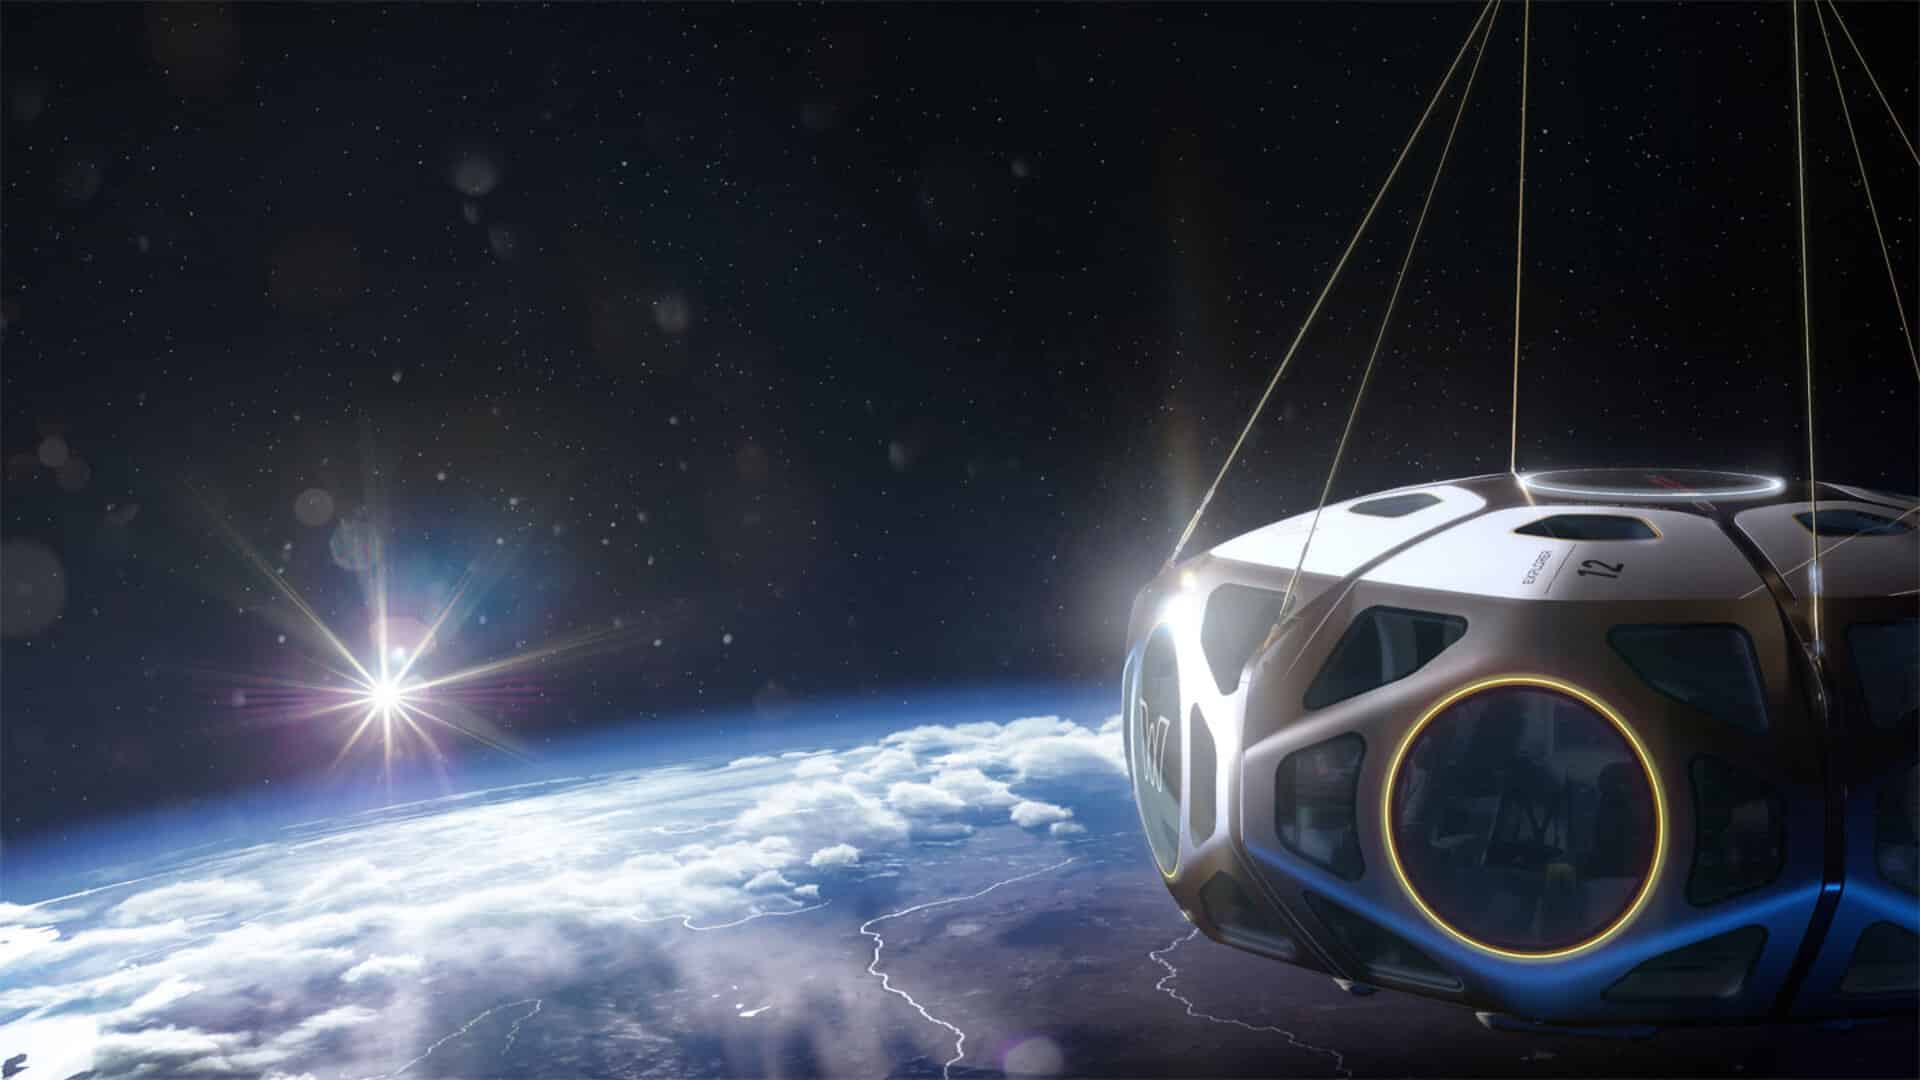 World View offers 5-day balloon voyage to edge of space, priced at $50,000 per seat